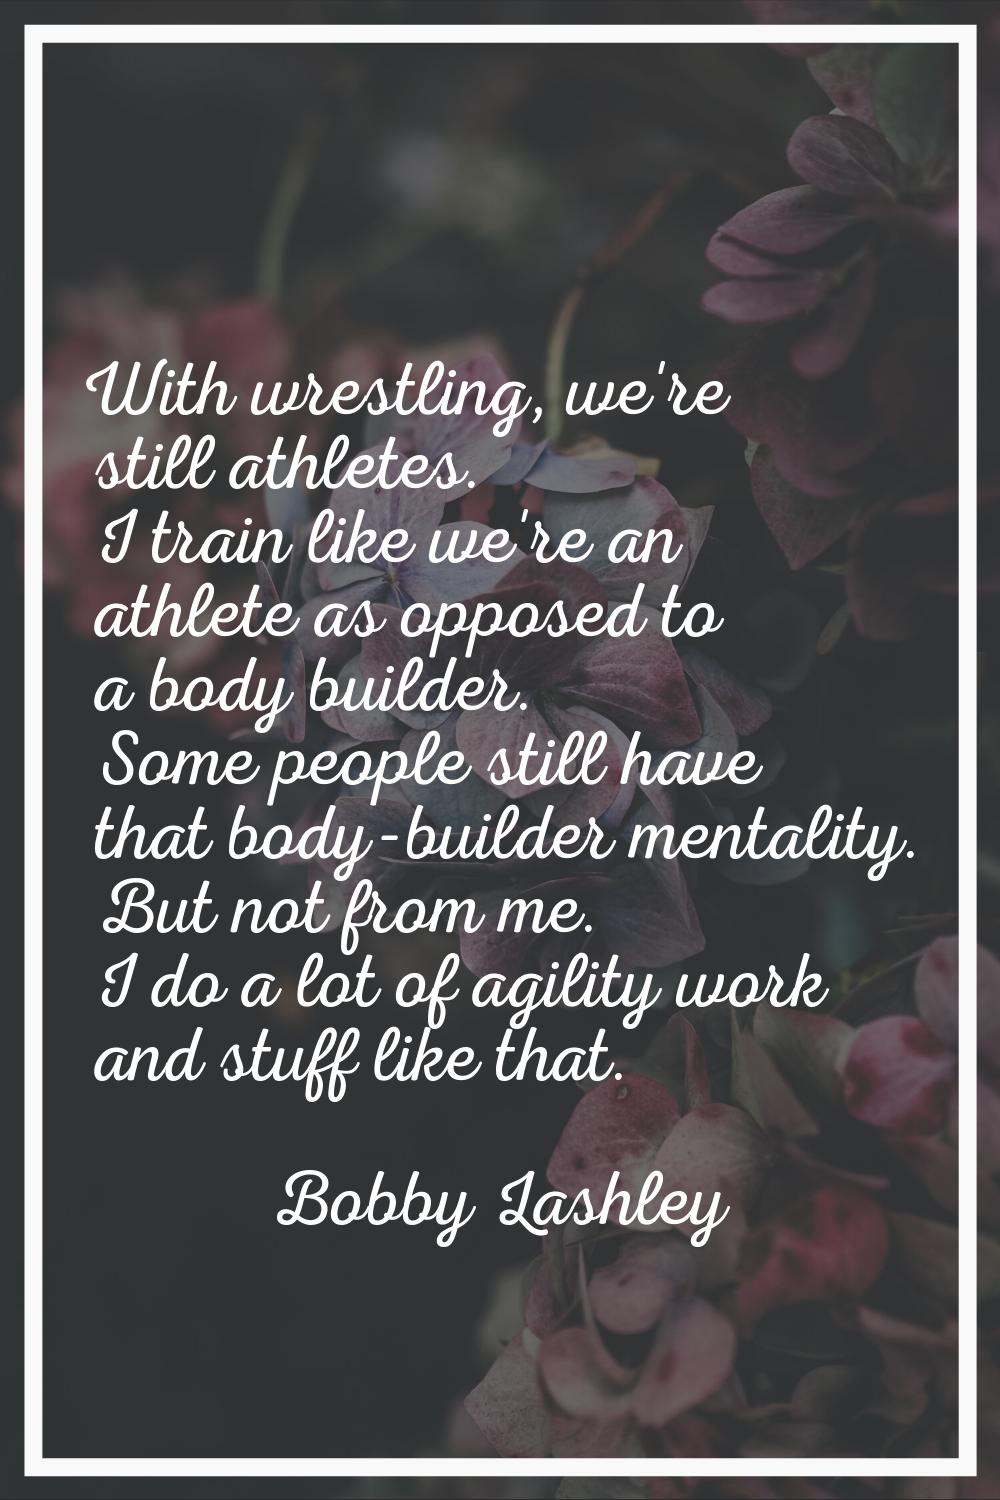 With wrestling, we're still athletes. I train like we're an athlete as opposed to a body builder. S